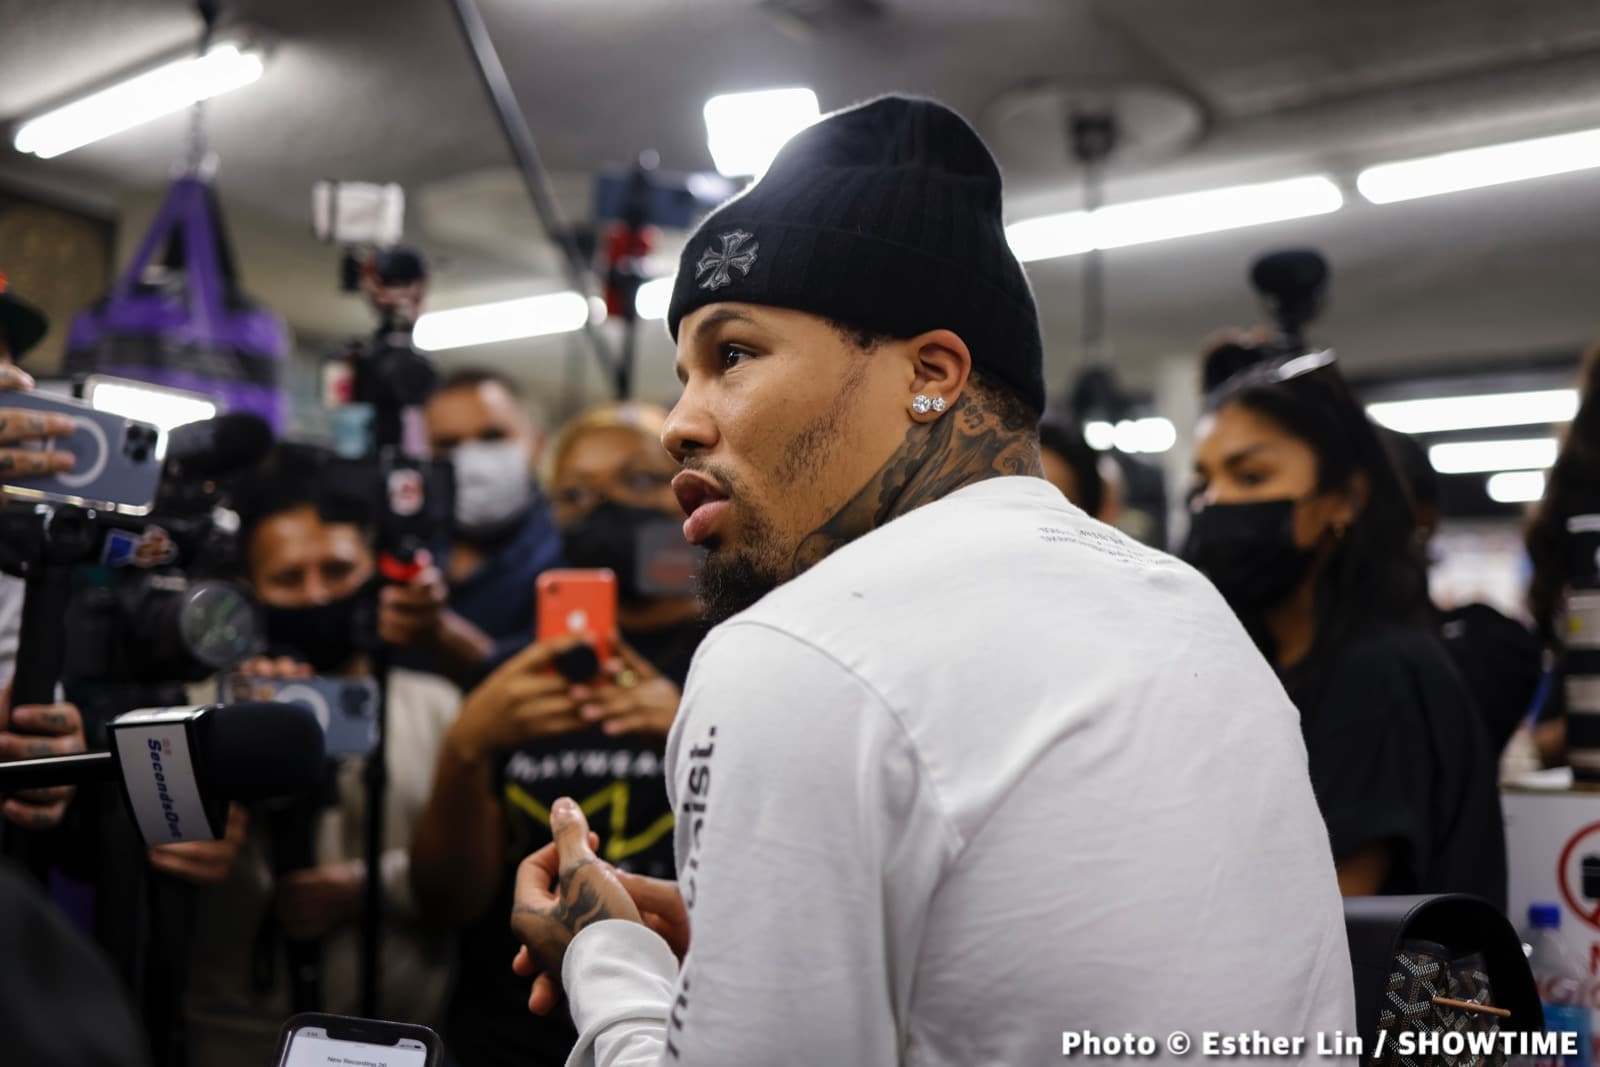 Gervonta Davis on Teofimo Lopez's loss to George Kambosos Jr: "He thought the guy was a slouch"